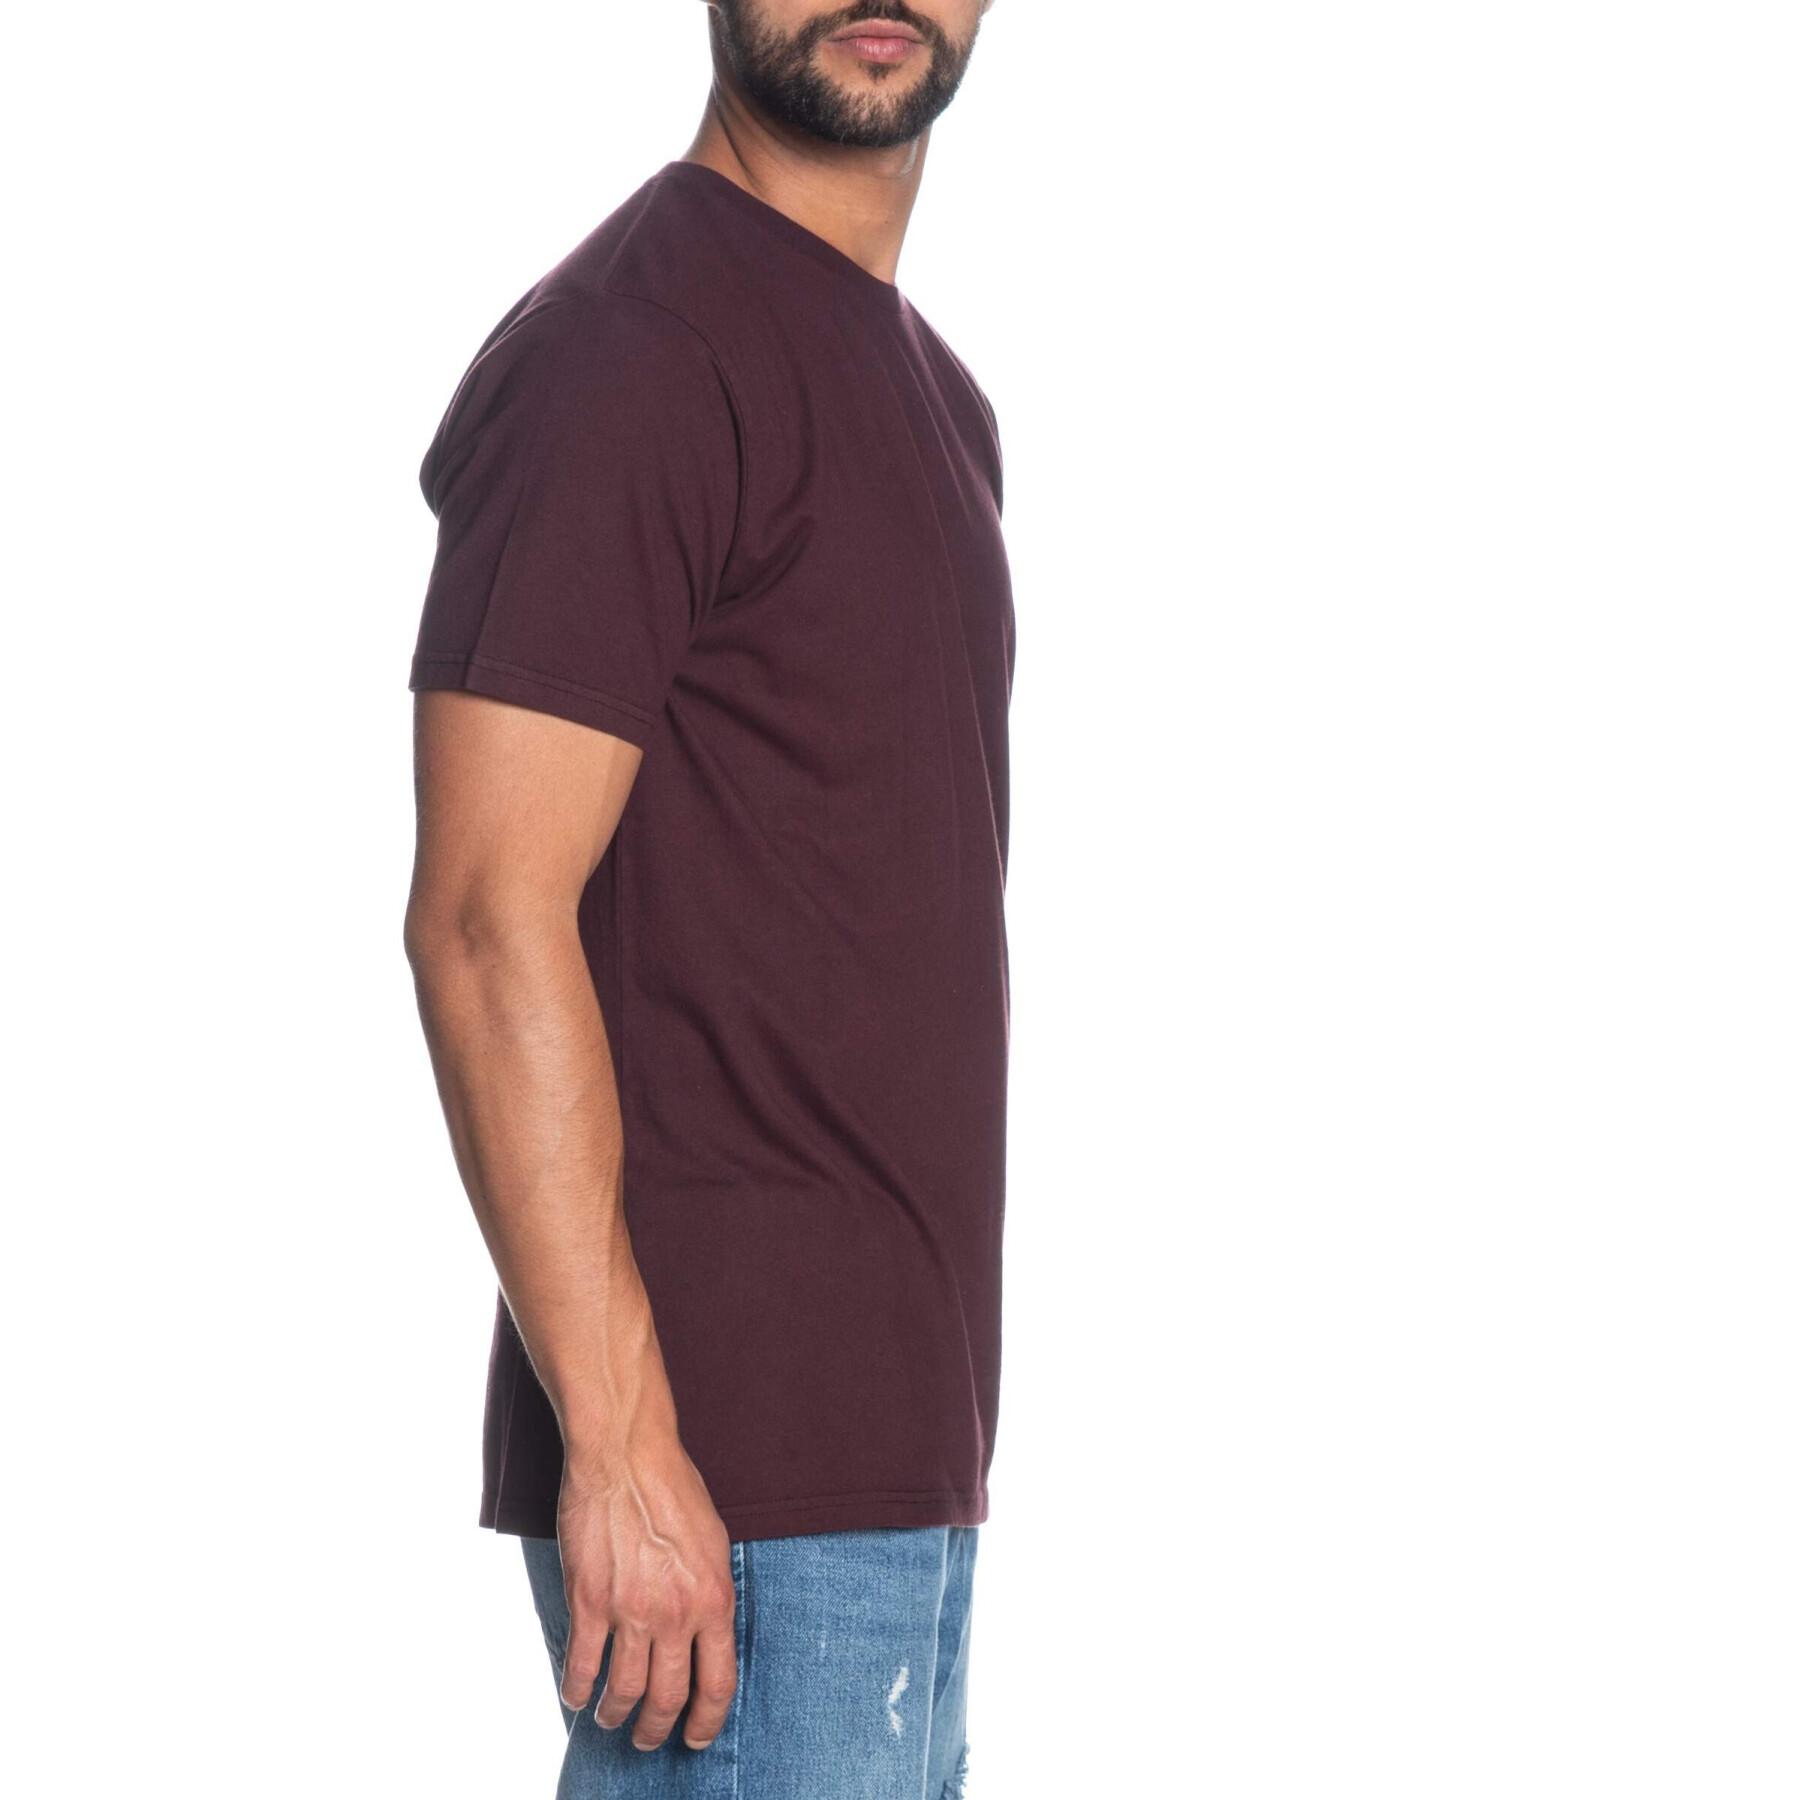 Camiseta Colorful Standard Oxblood Red